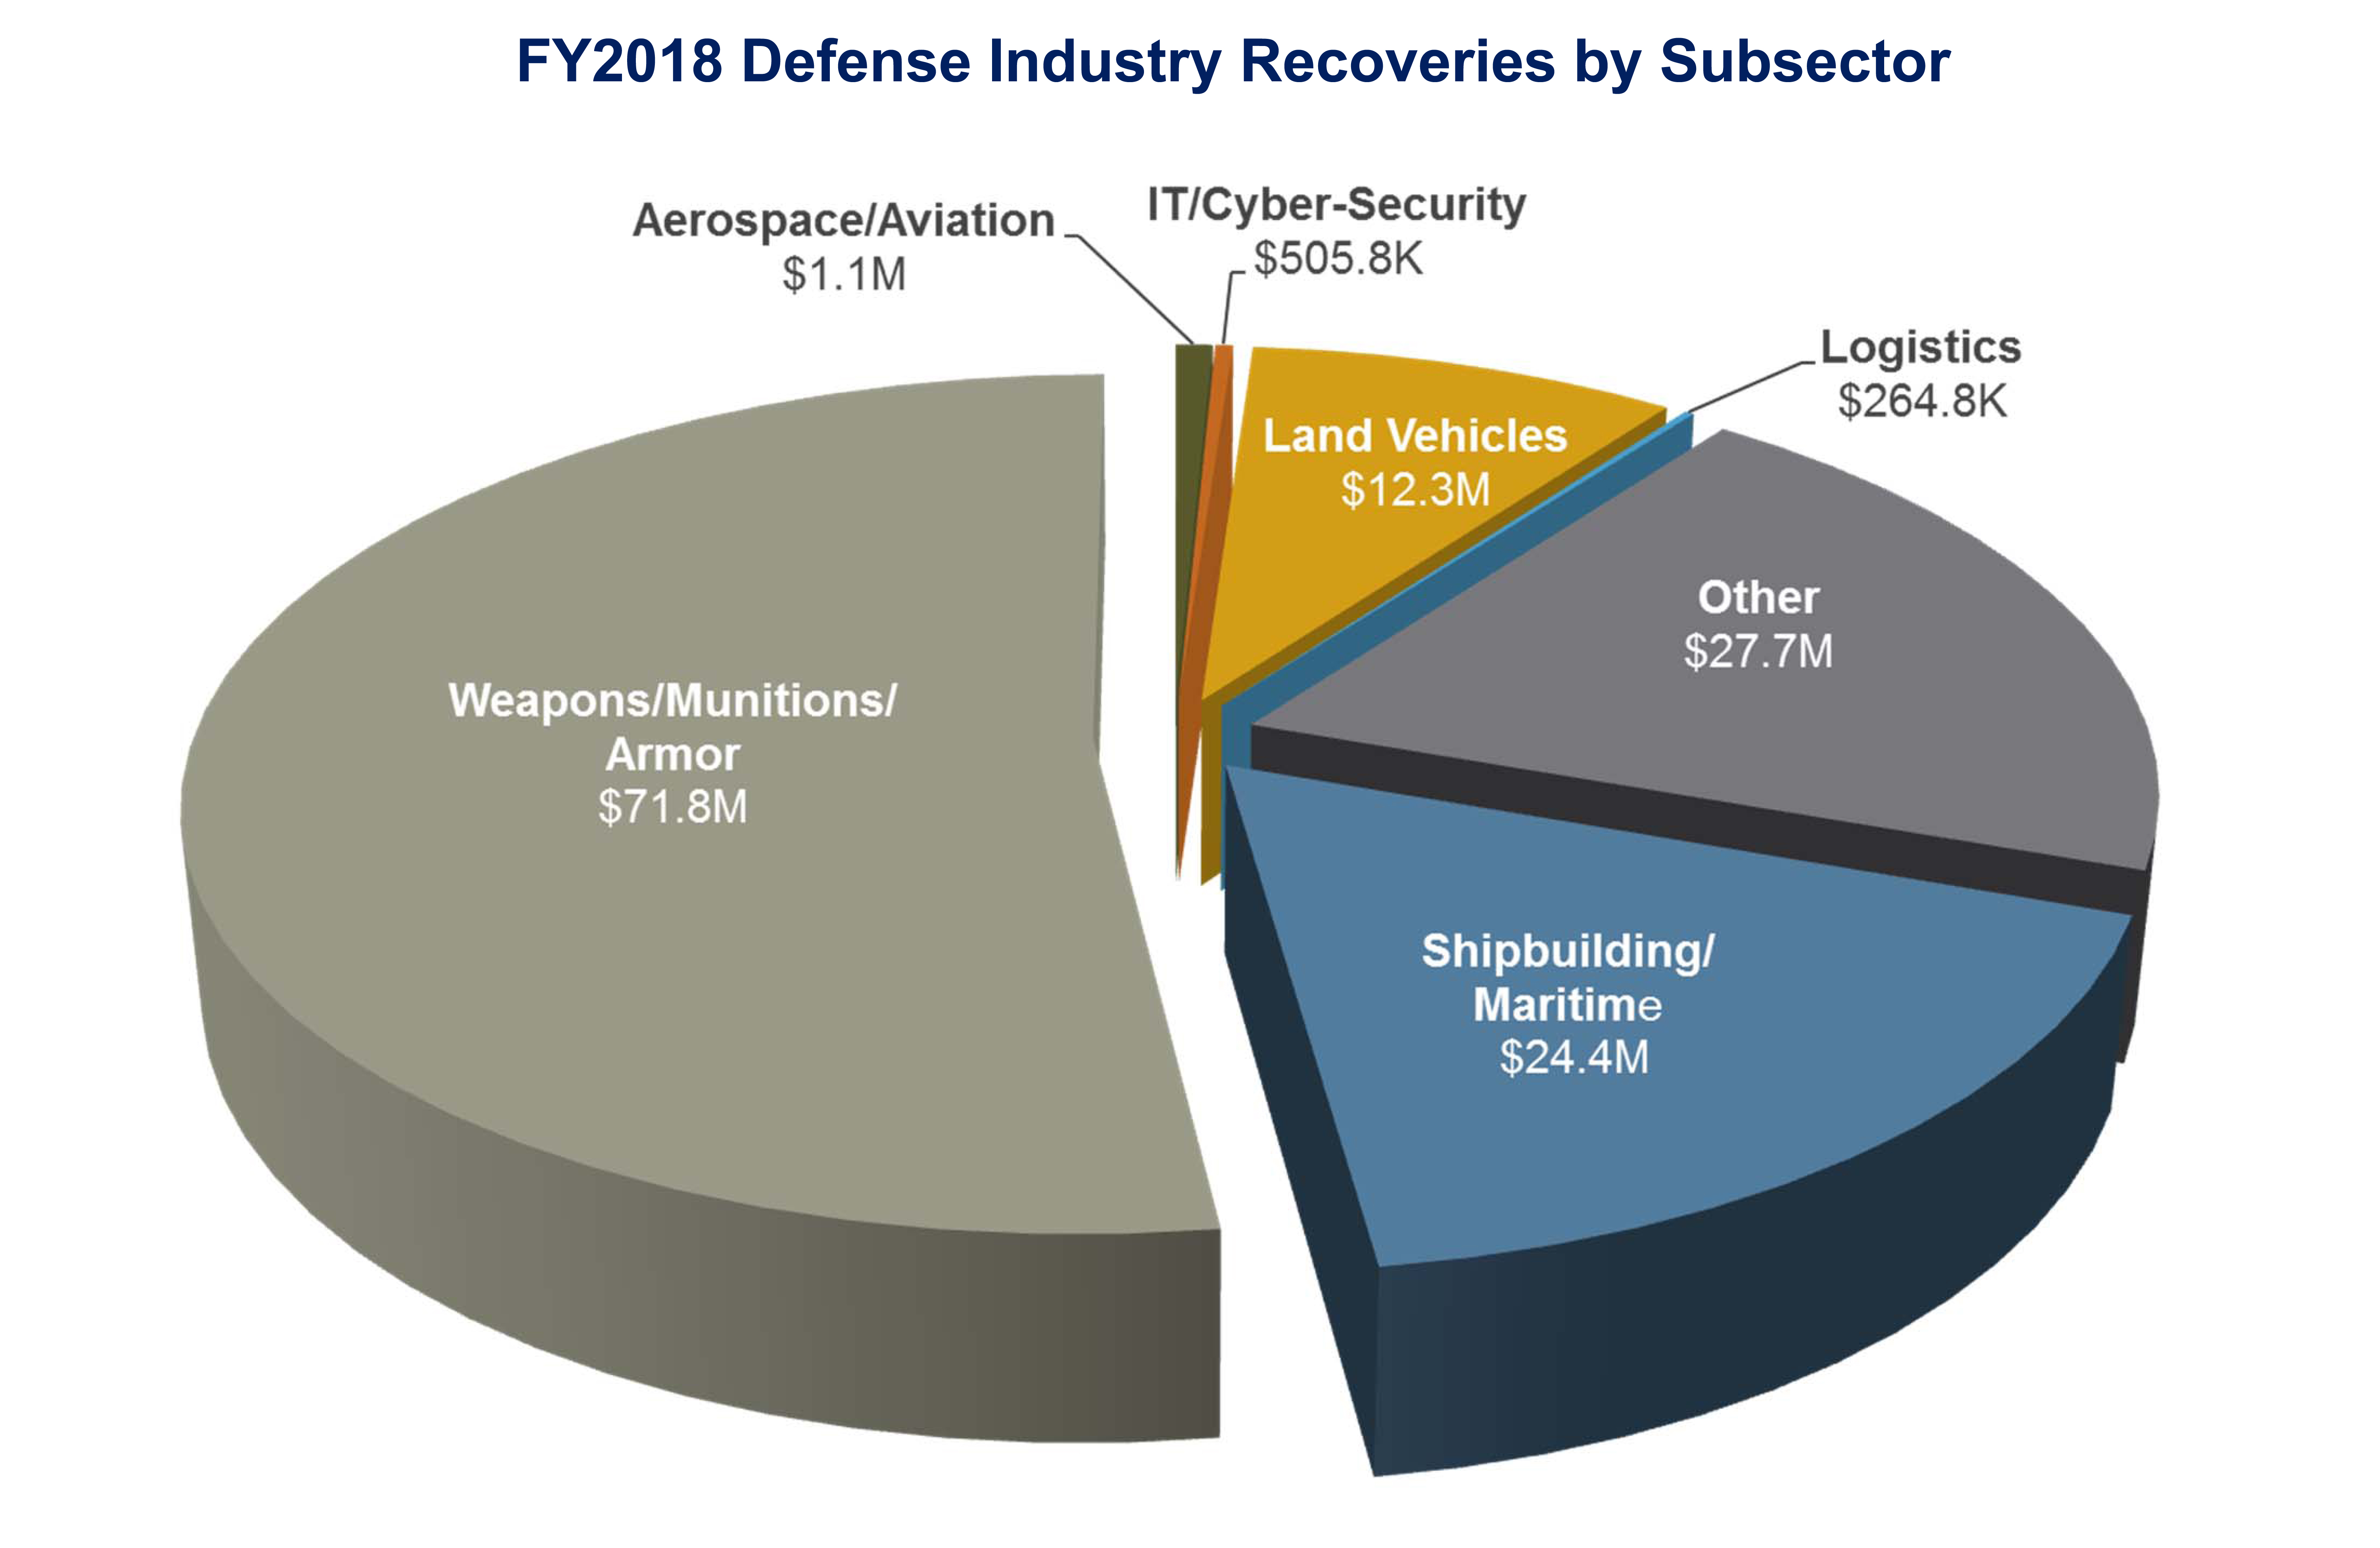 FY2018 Defense Industry Recoveries by Subsector